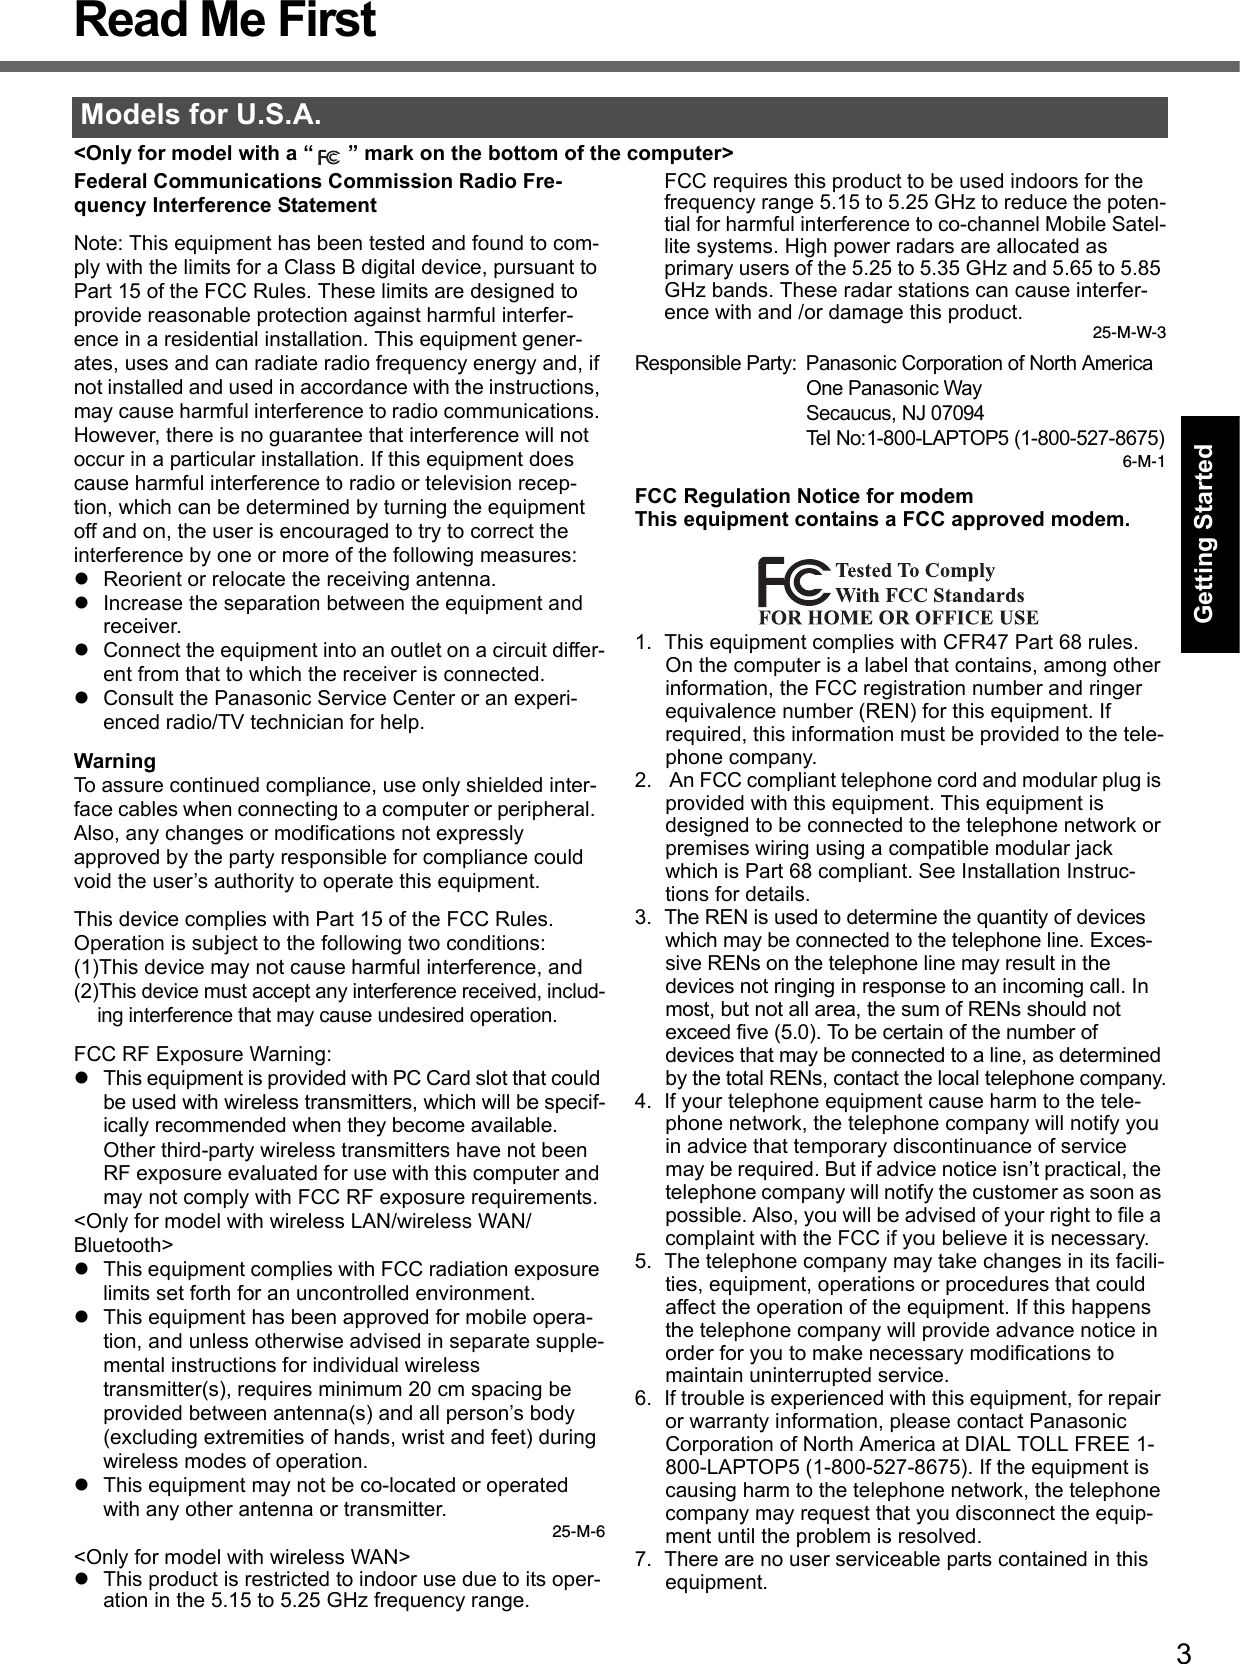 3Getting StartedUseful InformationTroubleshootingAppendixRead Me First&lt;Only for model with a “ ” mark on the bottom of the computer&gt;Federal Communications Commission Radio Fre-quency Interference StatementNote: This equipment has been tested and found to com-ply with the limits for a Class B digital device, pursuant to Part 15 of the FCC Rules. These limits are designed to provide reasonable protection against harmful interfer-ence in a residential installation. This equipment gener-ates, uses and can radiate radio frequency energy and, if not installed and used in accordance with the instructions, may cause harmful interference to radio communications. However, there is no guarantee that interference will not occur in a particular installation. If this equipment does cause harmful interference to radio or television recep-tion, which can be determined by turning the equipment off and on, the user is encouraged to try to correct the interference by one or more of the following measures:zReorient or relocate the receiving antenna.zIncrease the separation between the equipment and receiver.zConnect the equipment into an outlet on a circuit differ-ent from that to which the receiver is connected.zConsult the Panasonic Service Center or an experi-enced radio/TV technician for help.WarningTo assure continued compliance, use only shielded inter-face cables when connecting to a computer or peripheral.  Also, any changes or modifications not expressly approved by the party responsible for compliance could void the user’s authority to operate this equipment.This device complies with Part 15 of the FCC Rules.  Operation is subject to the following two conditions:(1)This device may not cause harmful interference, and(2)This device must accept any interference received, includ-ing interference that may cause undesired operation.FCC RF Exposure Warning:zThis equipment is provided with PC Card slot that could be used with wireless transmitters, which will be specif-ically recommended when they become available.Other third-party wireless transmitters have not been RF exposure evaluated for use with this computer and may not comply with FCC RF exposure requirements.&lt;Only for model with wireless LAN/wireless WAN/Bluetooth&gt;zThis equipment complies with FCC radiation exposure limits set forth for an uncontrolled environment.zThis equipment has been approved for mobile opera-tion, and unless otherwise advised in separate supple-mental instructions for individual wireless transmitter(s), requires minimum 20 cm spacing be provided between antenna(s) and all person’s body (excluding extremities of hands, wrist and feet) during wireless modes of operation.zThis equipment may not be co-located or operated with any other antenna or transmitter.25-M-6&lt;Only for model with wireless WAN&gt;zThis product is restricted to indoor use due to its oper-ation in the 5.15 to 5.25 GHz frequency range.FCC requires this product to be used indoors for the frequency range 5.15 to 5.25 GHz to reduce the poten-tial for harmful interference to co-channel Mobile Satel-lite systems. High power radars are allocated as primary users of the 5.25 to 5.35 GHz and 5.65 to 5.85 GHz bands. These radar stations can cause interfer-ence with and /or damage this product.25-M-W-3Responsible Party: Panasonic Corporation of North AmericaOne Panasonic WaySecaucus, NJ 07094Tel No:1-800-LAPTOP5 (1-800-527-8675)6-M-1FCC Regulation Notice for modemThis equipment contains a FCC approved modem.1. This equipment complies with CFR47 Part 68 rules. On the computer is a label that contains, among other information, the FCC registration number and ringer equivalence number (REN) for this equipment. If required, this information must be provided to the tele-phone company.2.  An FCC compliant telephone cord and modular plug is provided with this equipment. This equipment is designed to be connected to the telephone network or premises wiring using a compatible modular jack which is Part 68 compliant. See Installation Instruc-tions for details.3.The REN is used to determine the quantity of devices which may be connected to the telephone line. Exces-sive RENs on the telephone line may result in the devices not ringing in response to an incoming call. In most, but not all area, the sum of RENs should not exceed five (5.0). To be certain of the number of devices that may be connected to a line, as determined by the total RENs, contact the local telephone company.4. If your telephone equipment cause harm to the tele-phone network, the telephone company will notify you in advice that temporary discontinuance of service may be required. But if advice notice isn’t practical, the telephone company will notify the customer as soon as possible. Also, you will be advised of your right to file a complaint with the FCC if you believe it is necessary.5. The telephone company may take changes in its facili-ties, equipment, operations or procedures that could affect the operation of the equipment. If this happens the telephone company will provide advance notice in order for you to make necessary modifications to maintain uninterrupted service.6. If trouble is experienced with this equipment, for repair or warranty information, please contact Panasonic Corporation of North America at DIAL TOLL FREE 1-800-LAPTOP5 (1-800-527-8675). If the equipment is causing harm to the telephone network, the telephone company may request that you disconnect the equip-ment until the problem is resolved.7. There are no user serviceable parts contained in this equipment.Models for U.S.A.